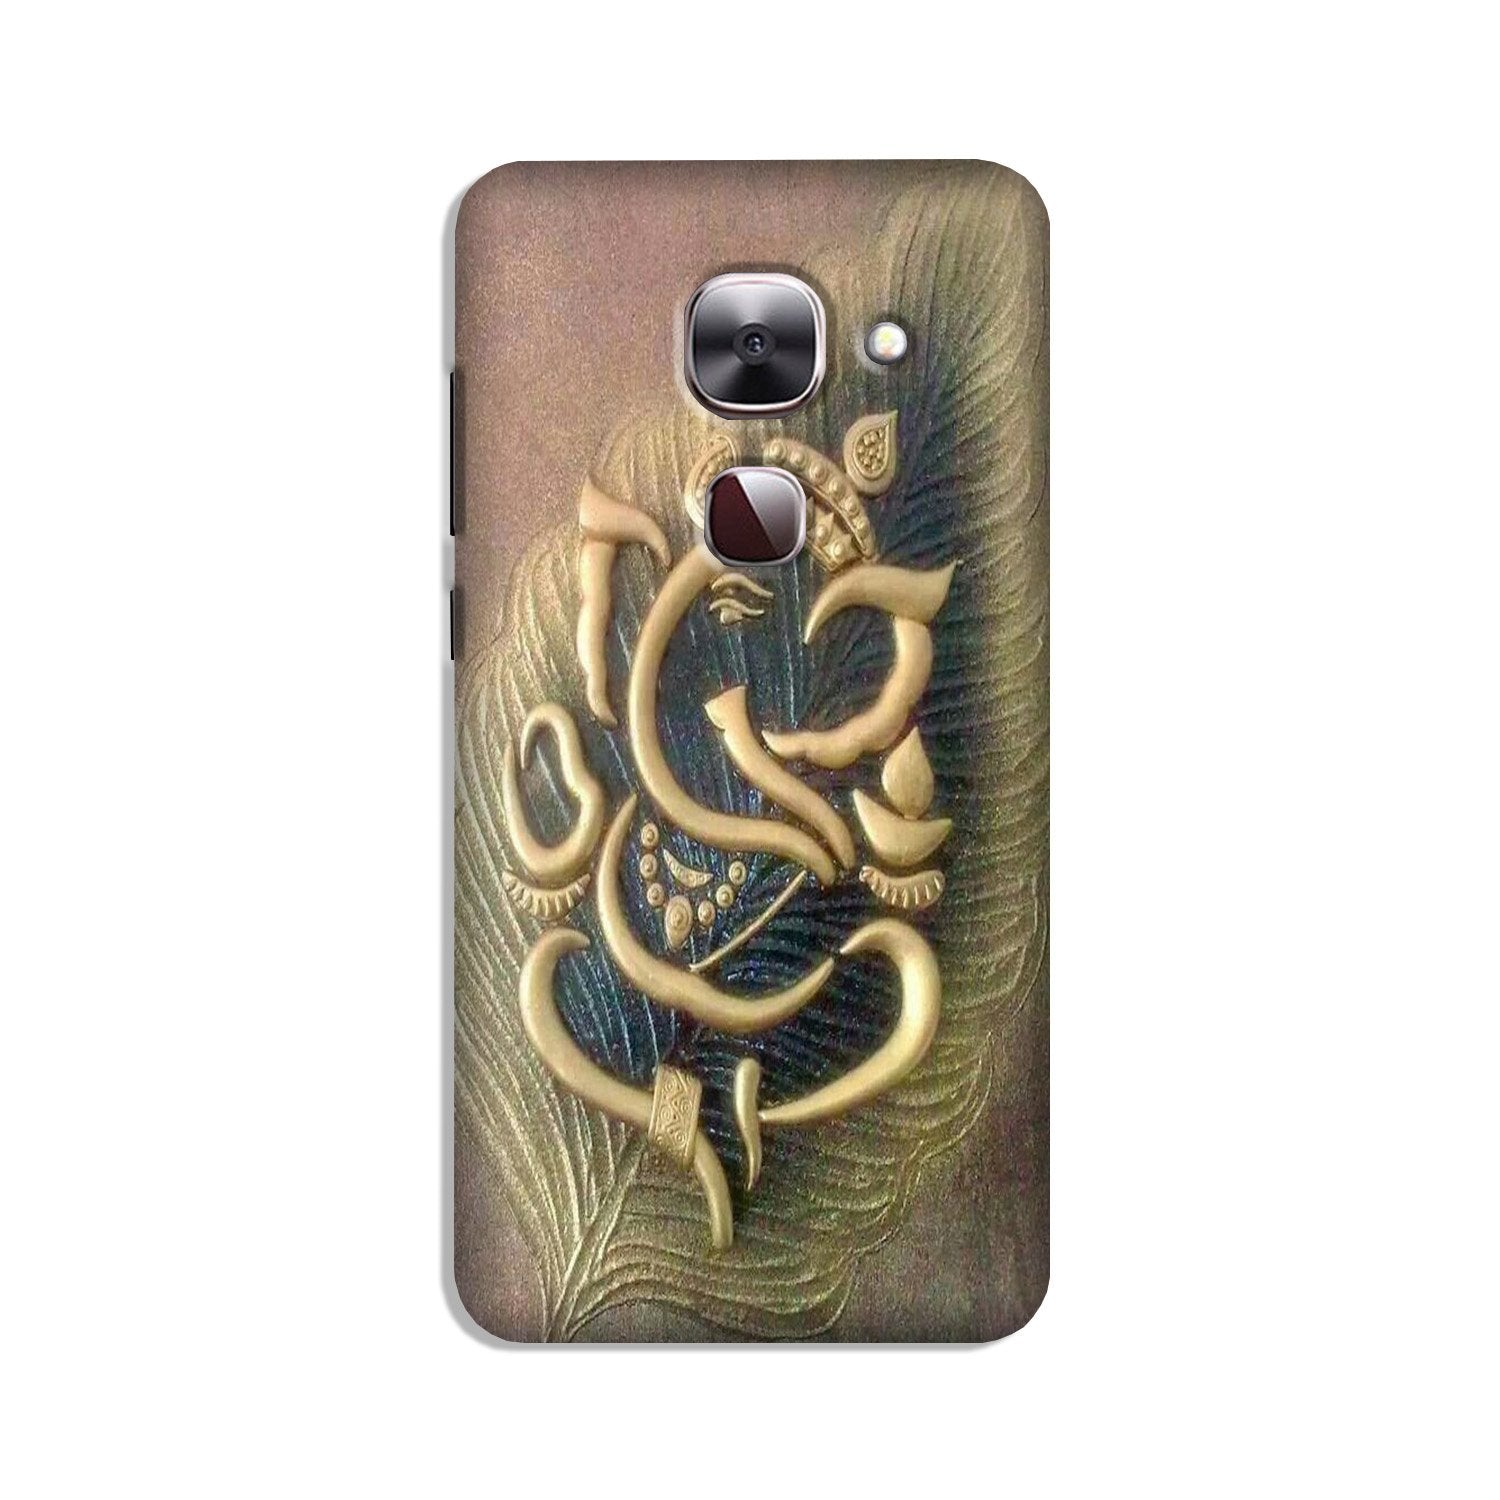 Lord Ganesha Case for LeEco le 2s